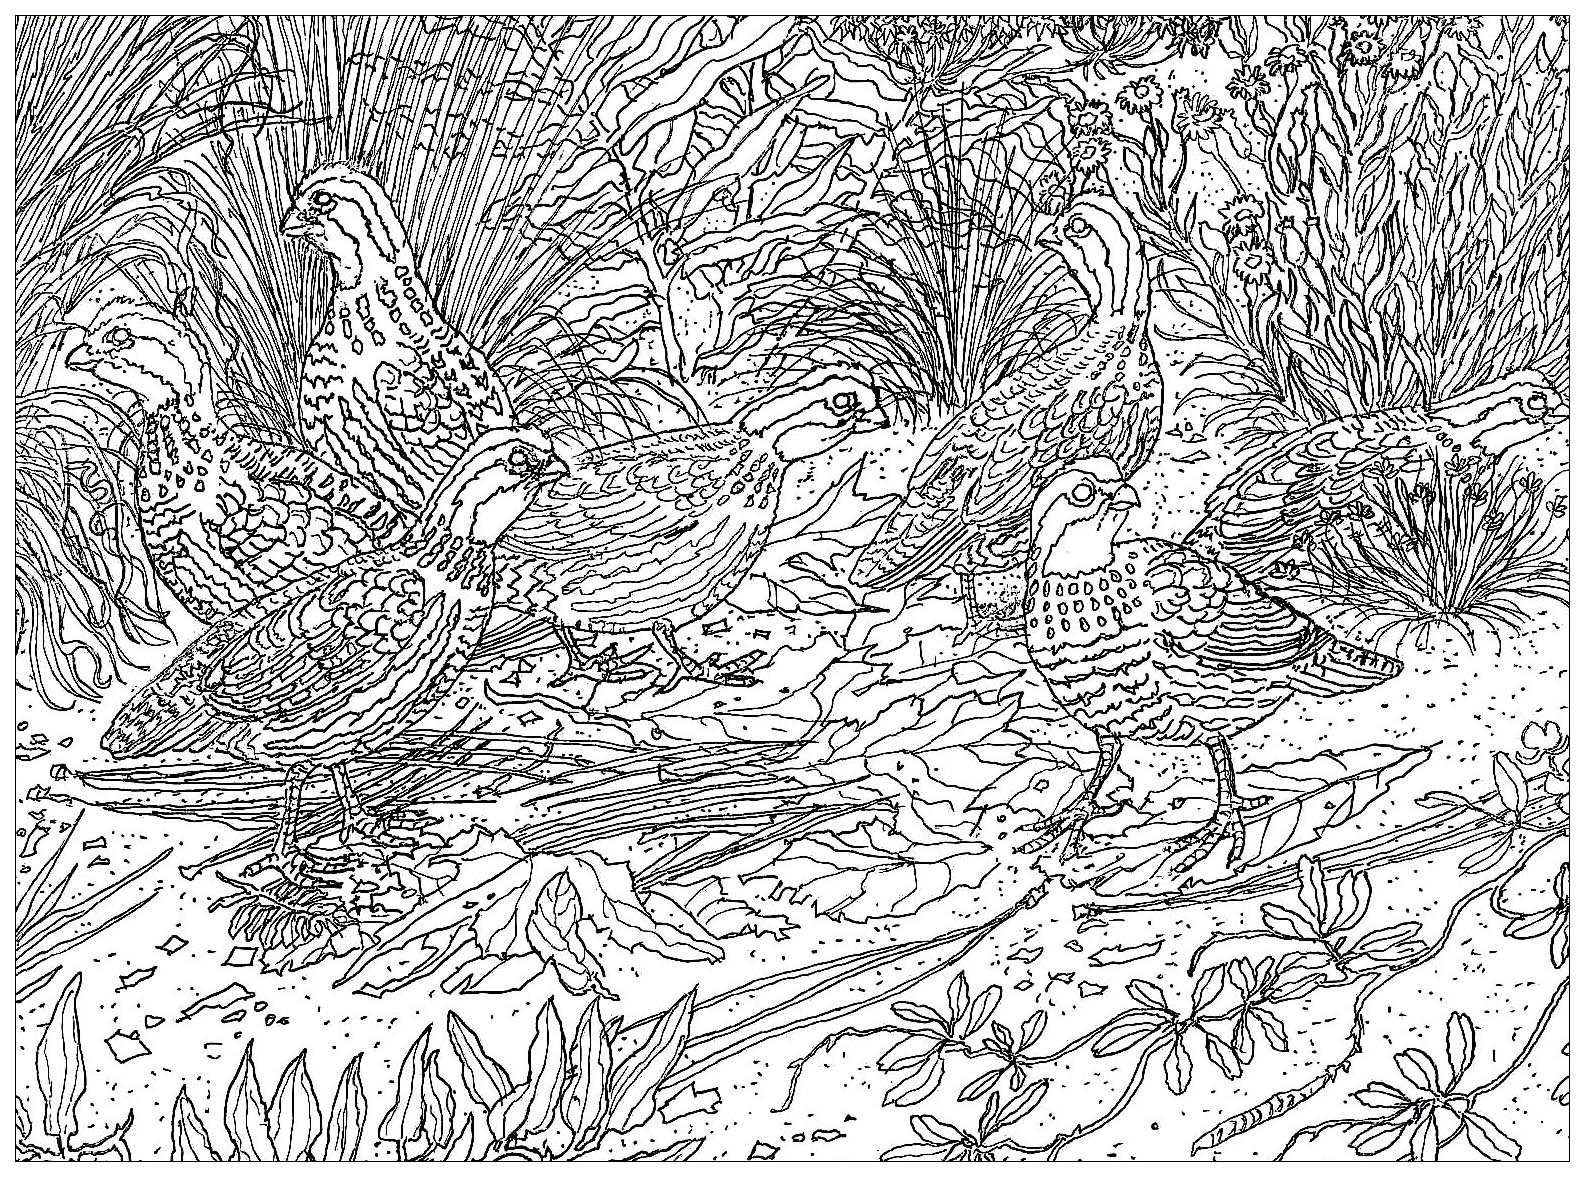 Birds on the ground, drawing made from a picture